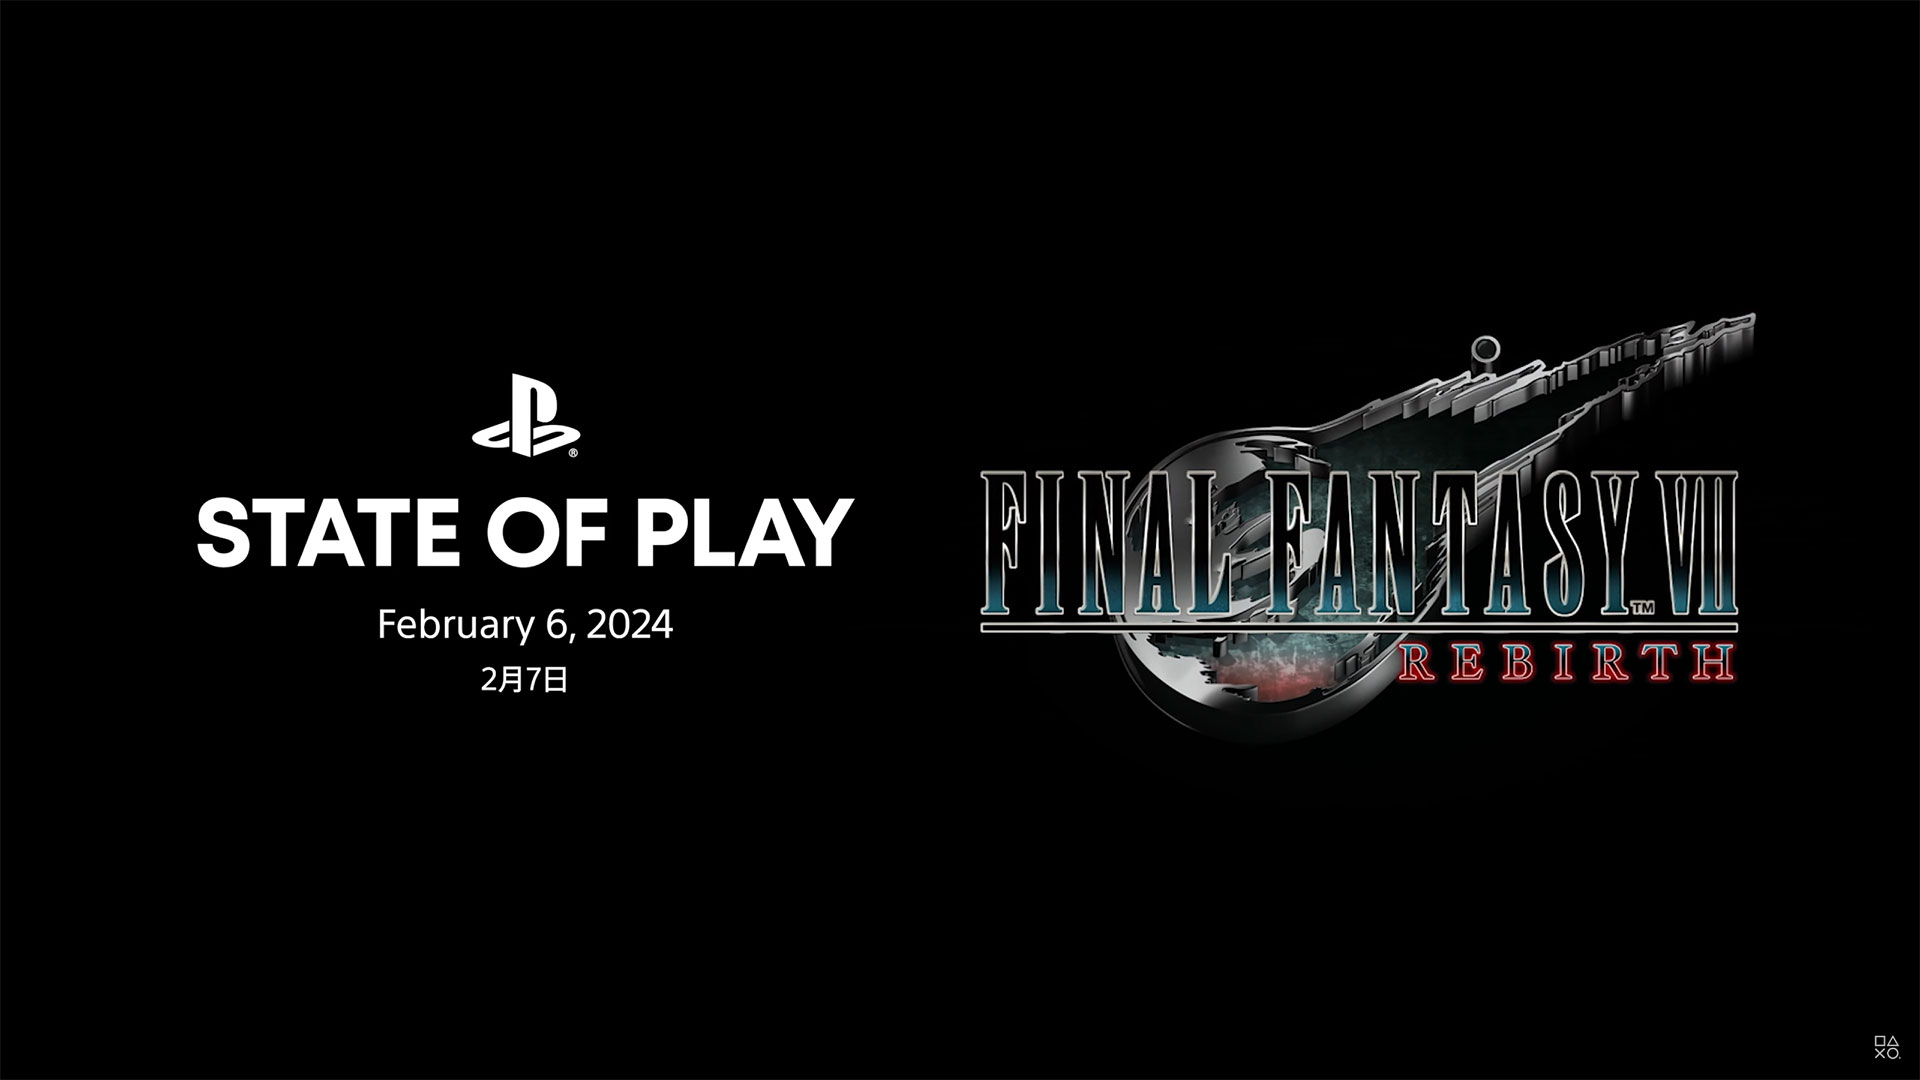 The Final Fantasy VII Rebirth State of Play will happen on February 6